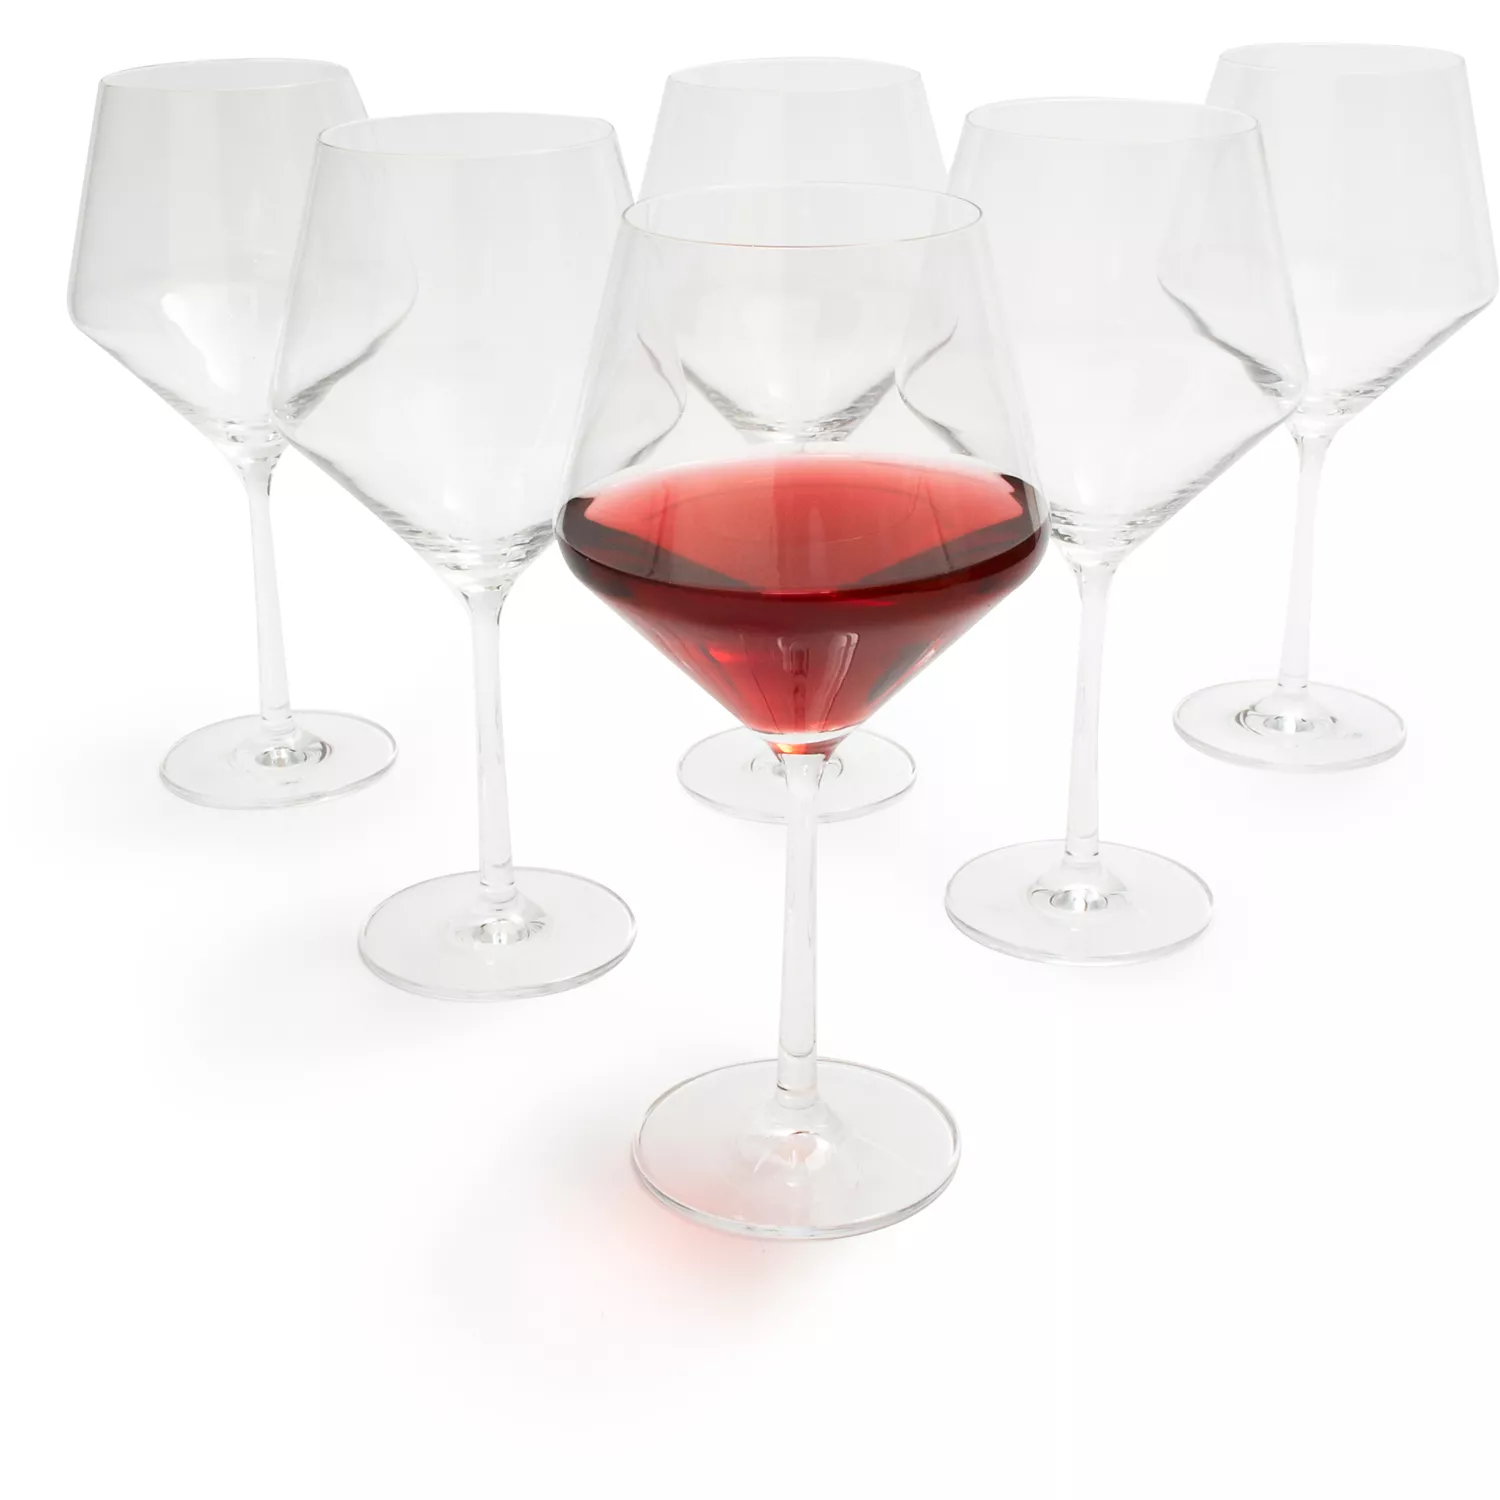 Zwiesel Pure Tritan Crystal Light Red Stemless Wine Glass